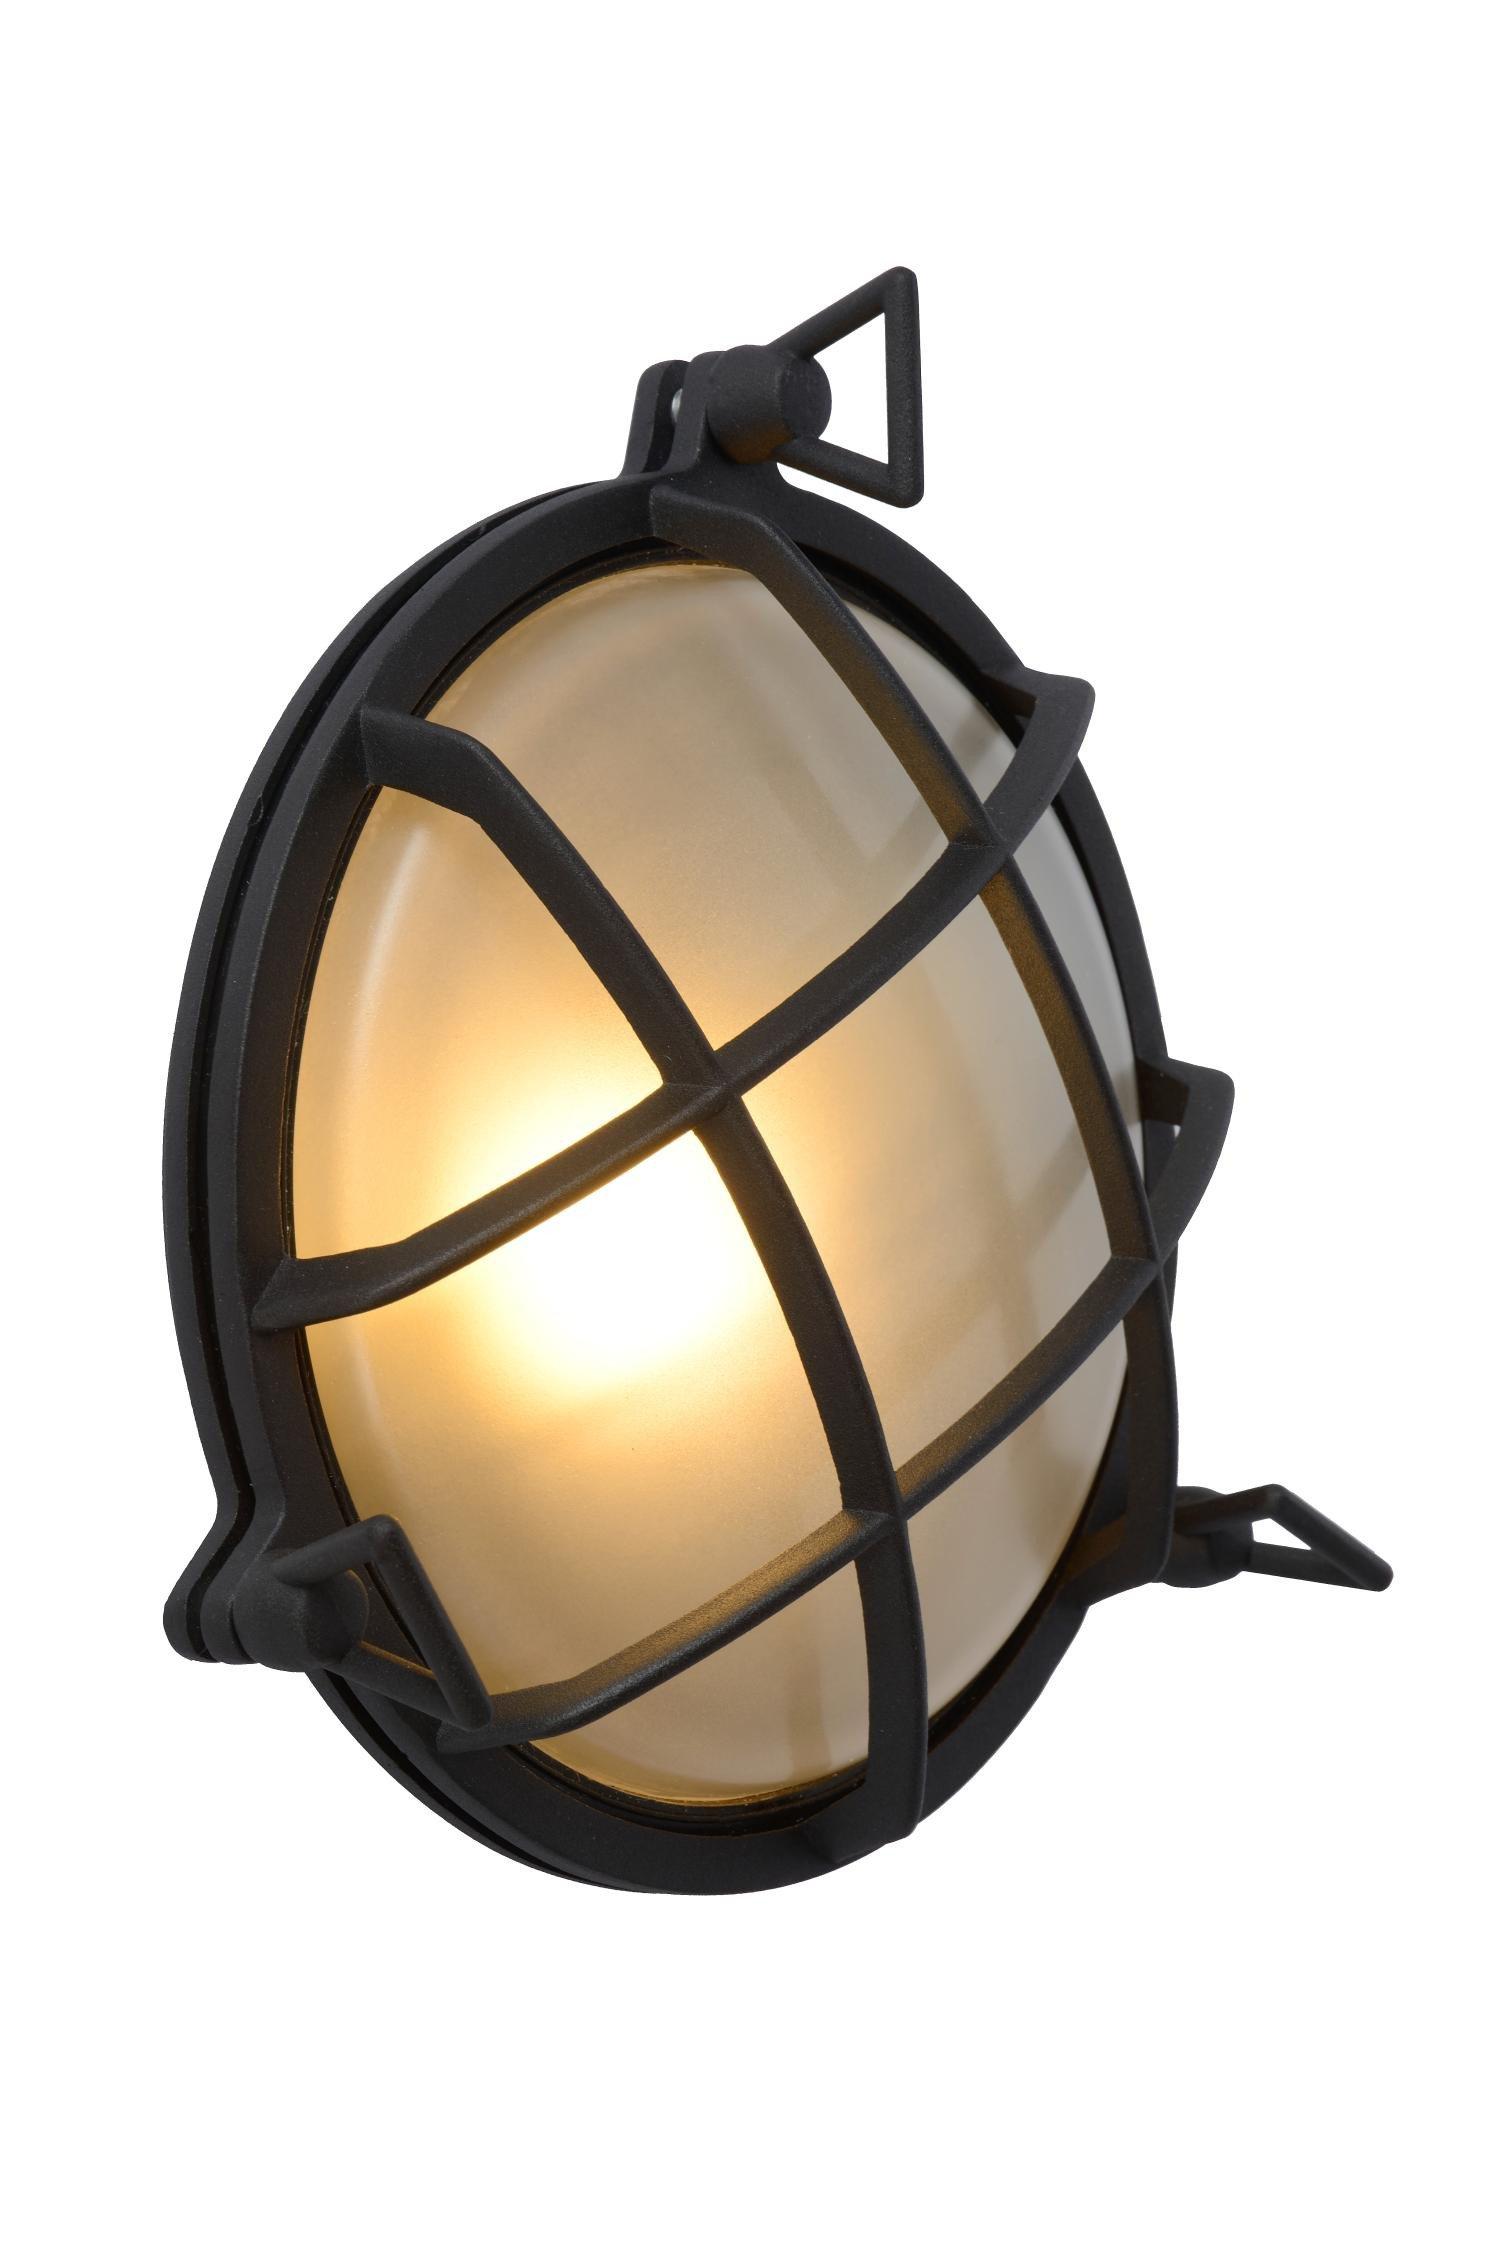 Lucide Dudley Retro Round Bulkhead Wall Light Outdoor 1xE27 IP65 Black